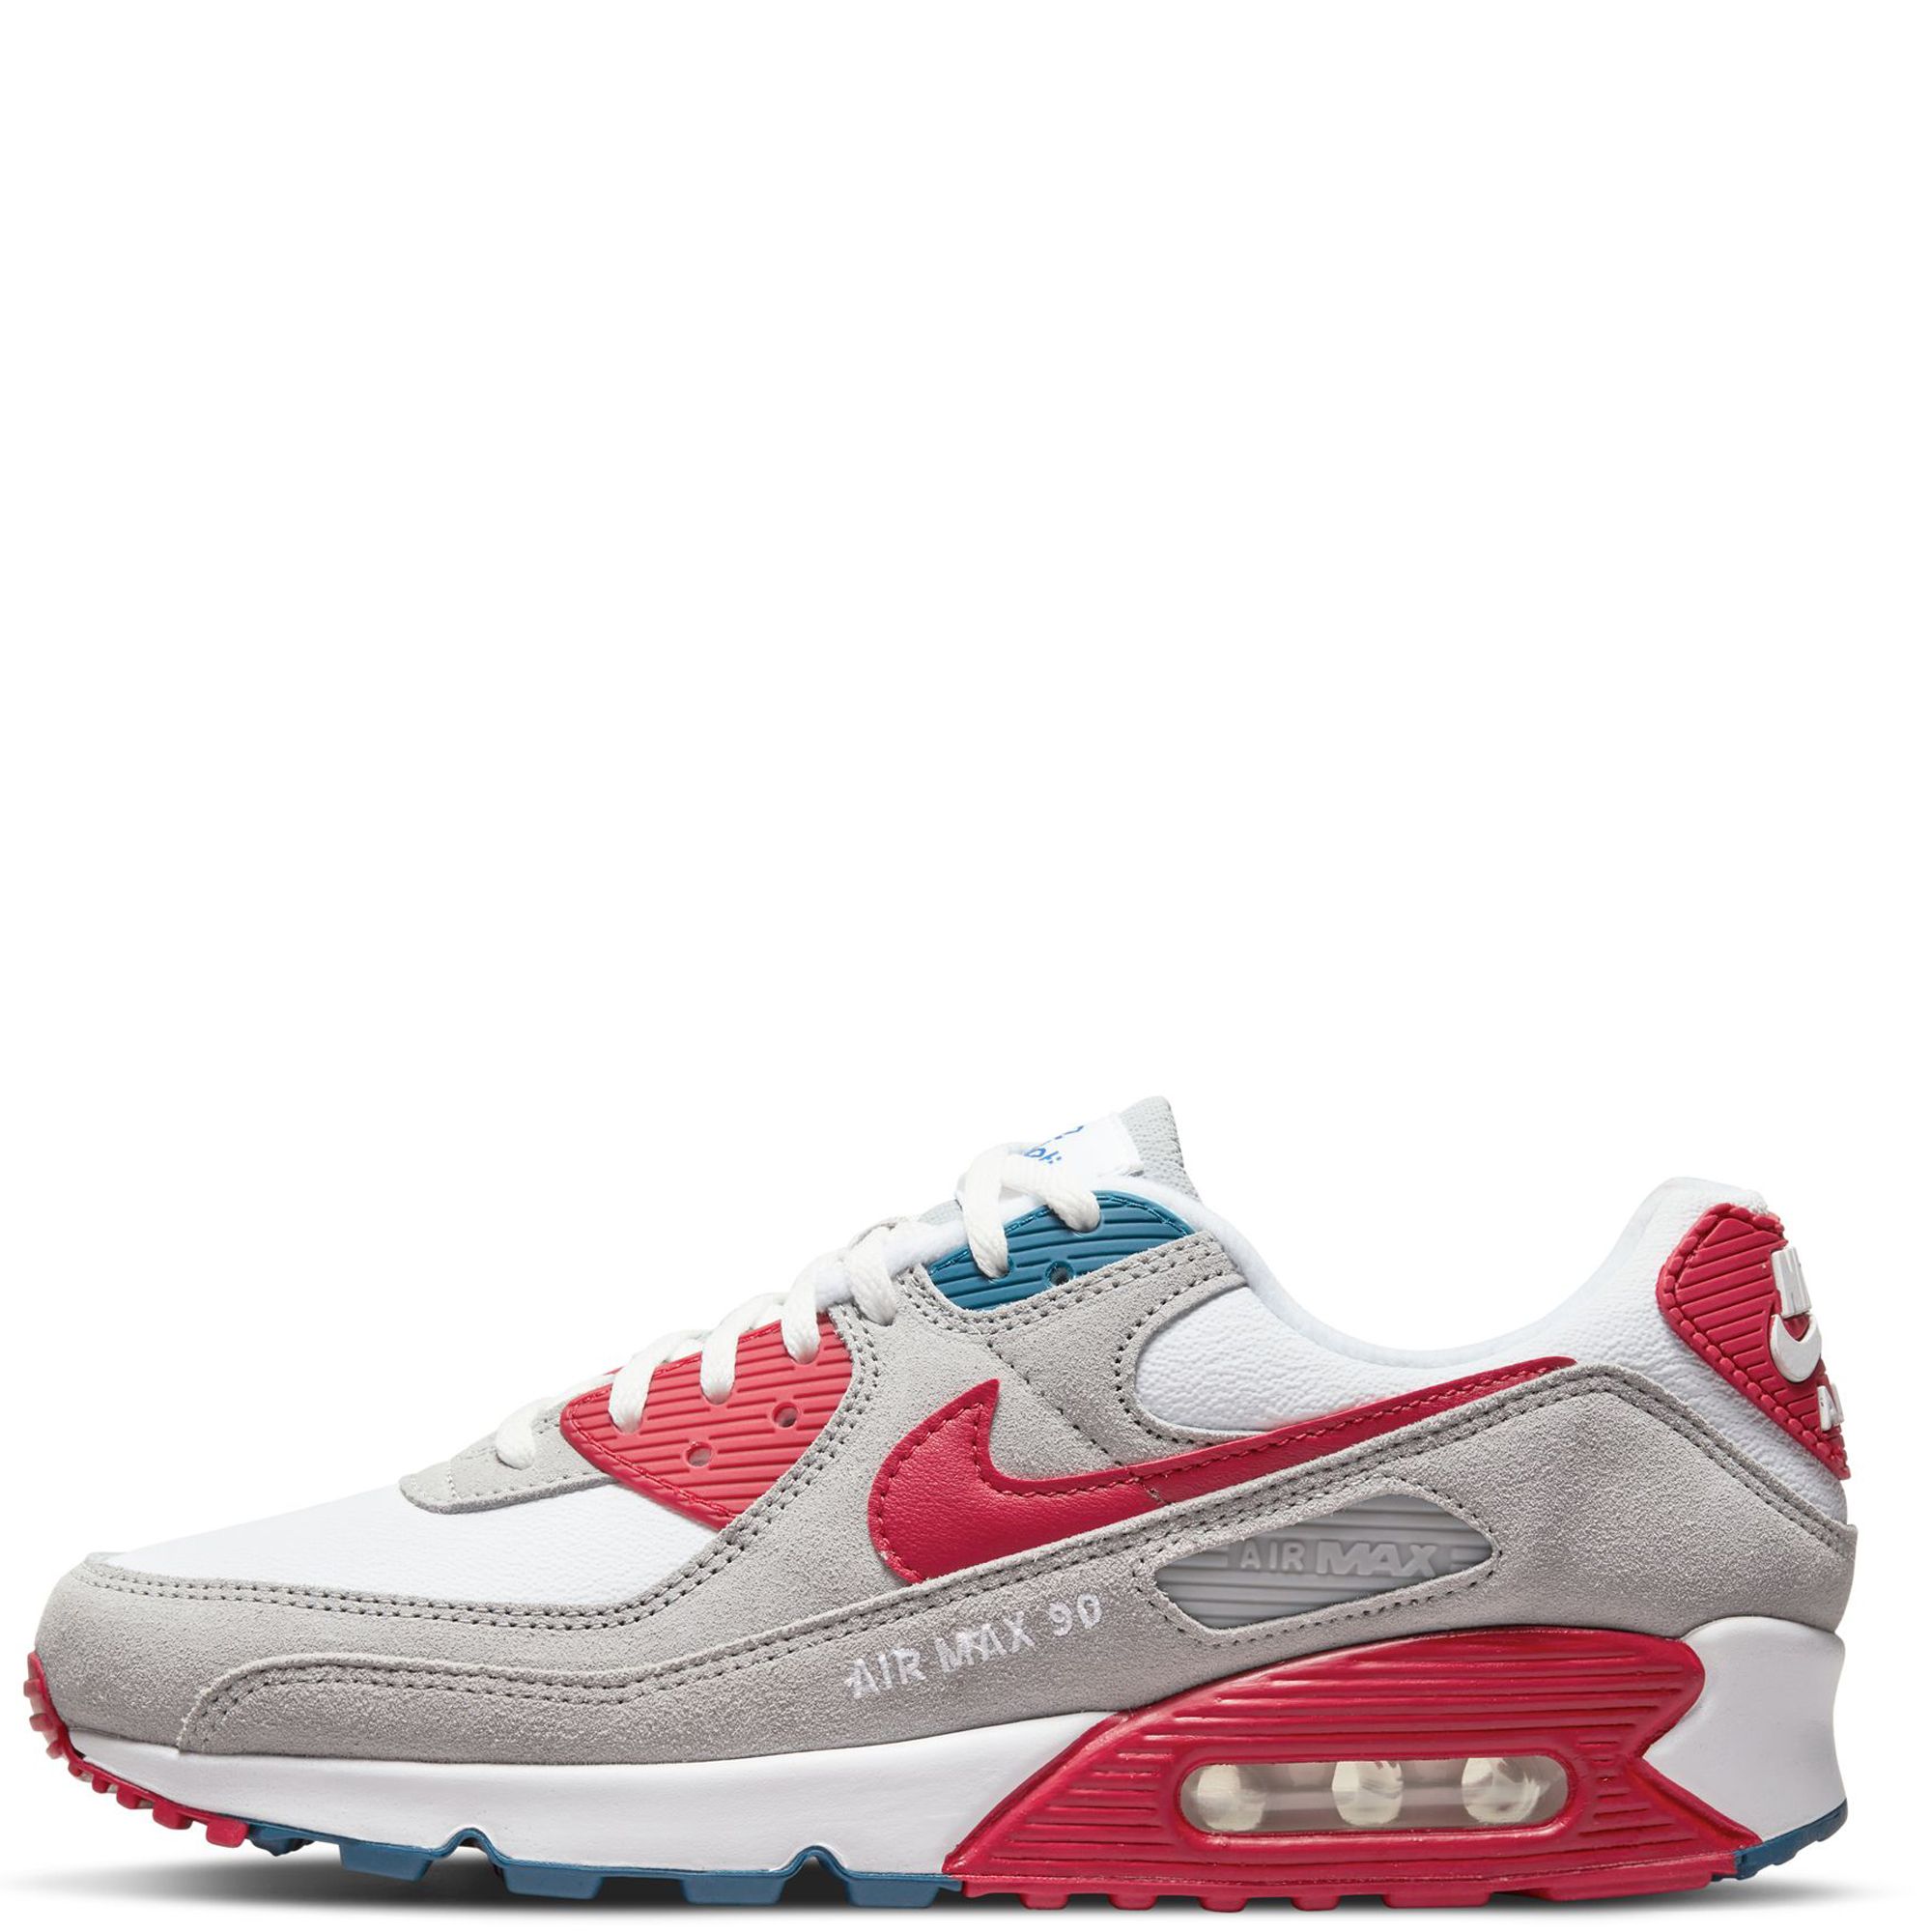 Nike Air Max 1 OG Red - 8 Generations of Retros 